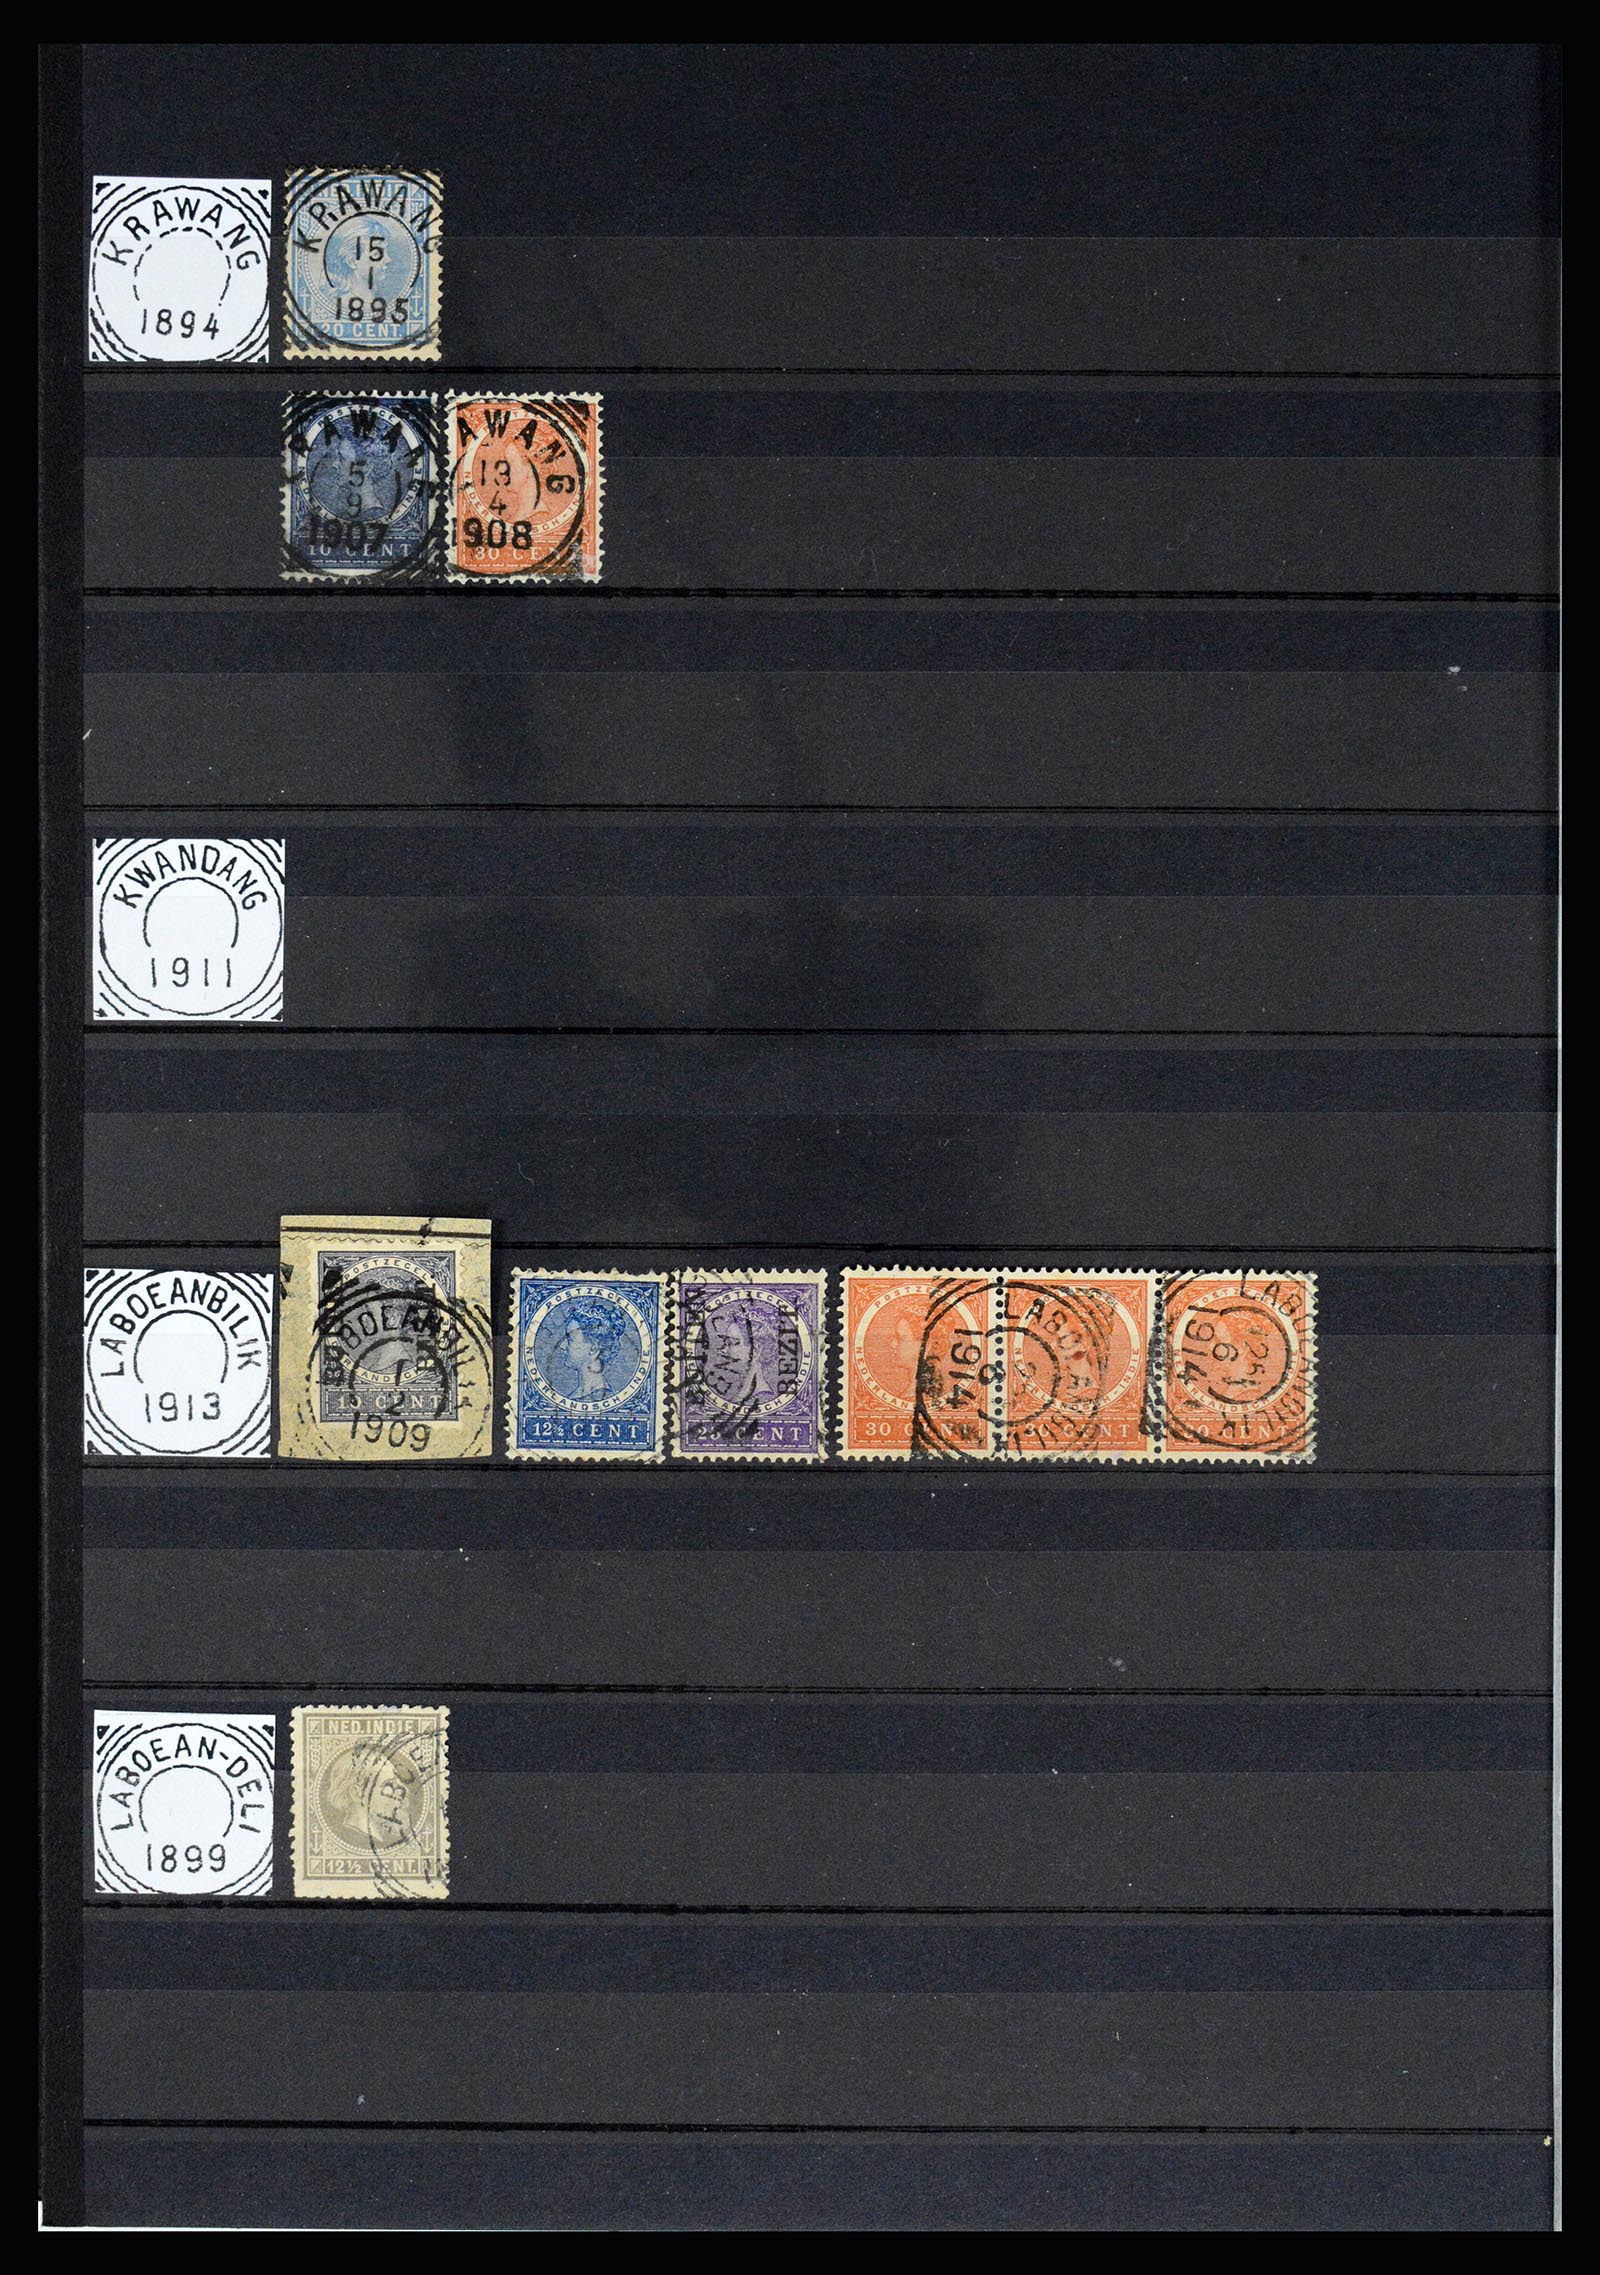 36839 023 - Stamp collection 36839 Dutch east Indies square cancels.